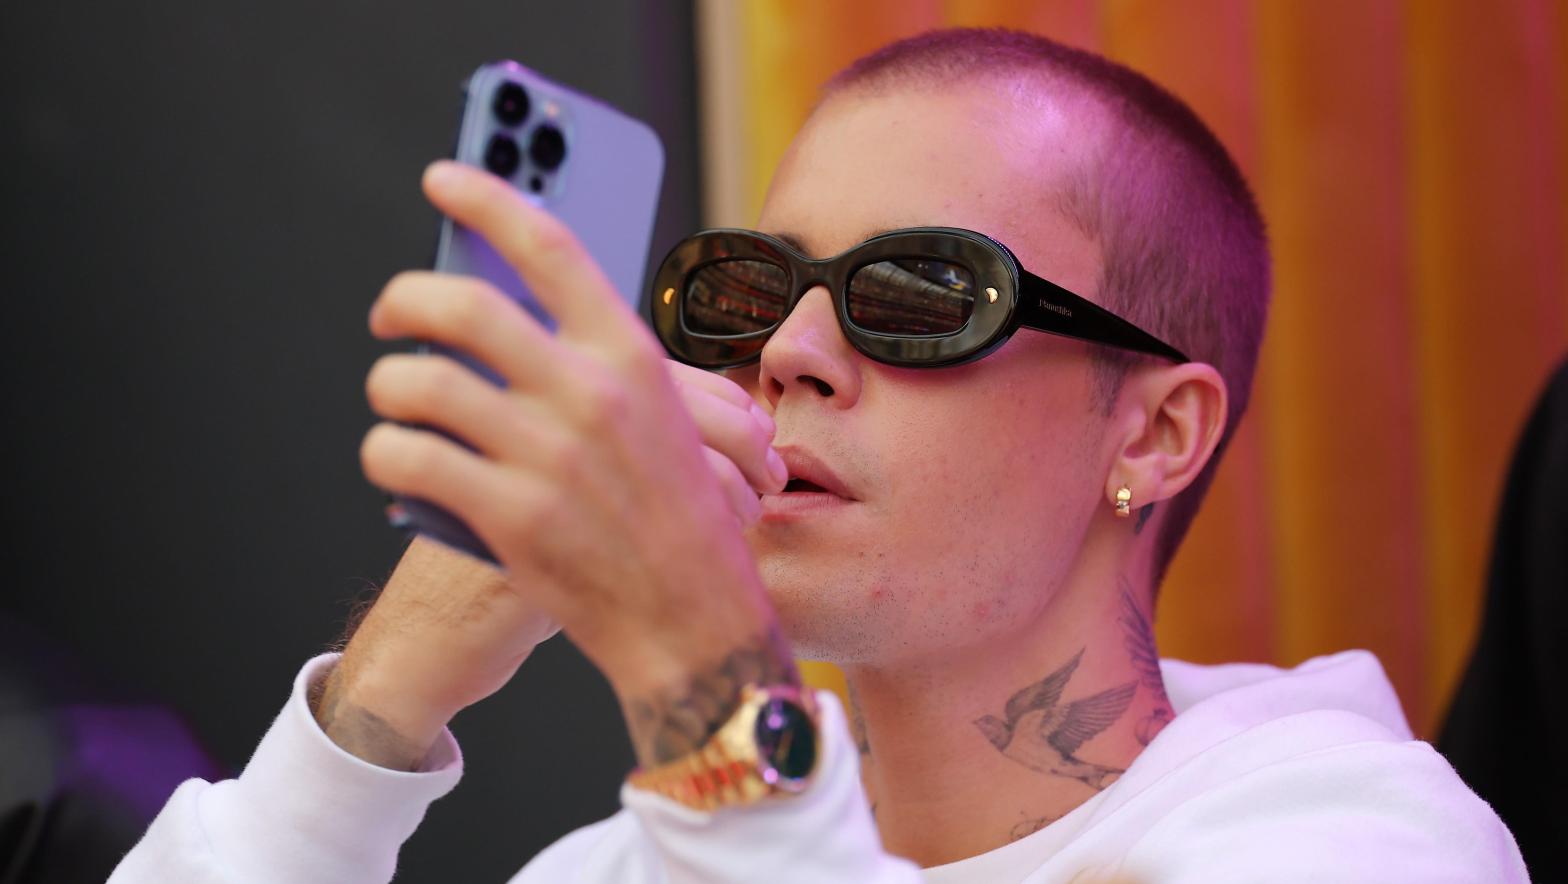 Justin Bieber on his phone at Super Bowl LVI on February 13, 2022 in Inglewood, California. (Photo: Kevin C. Cox, Getty Images)